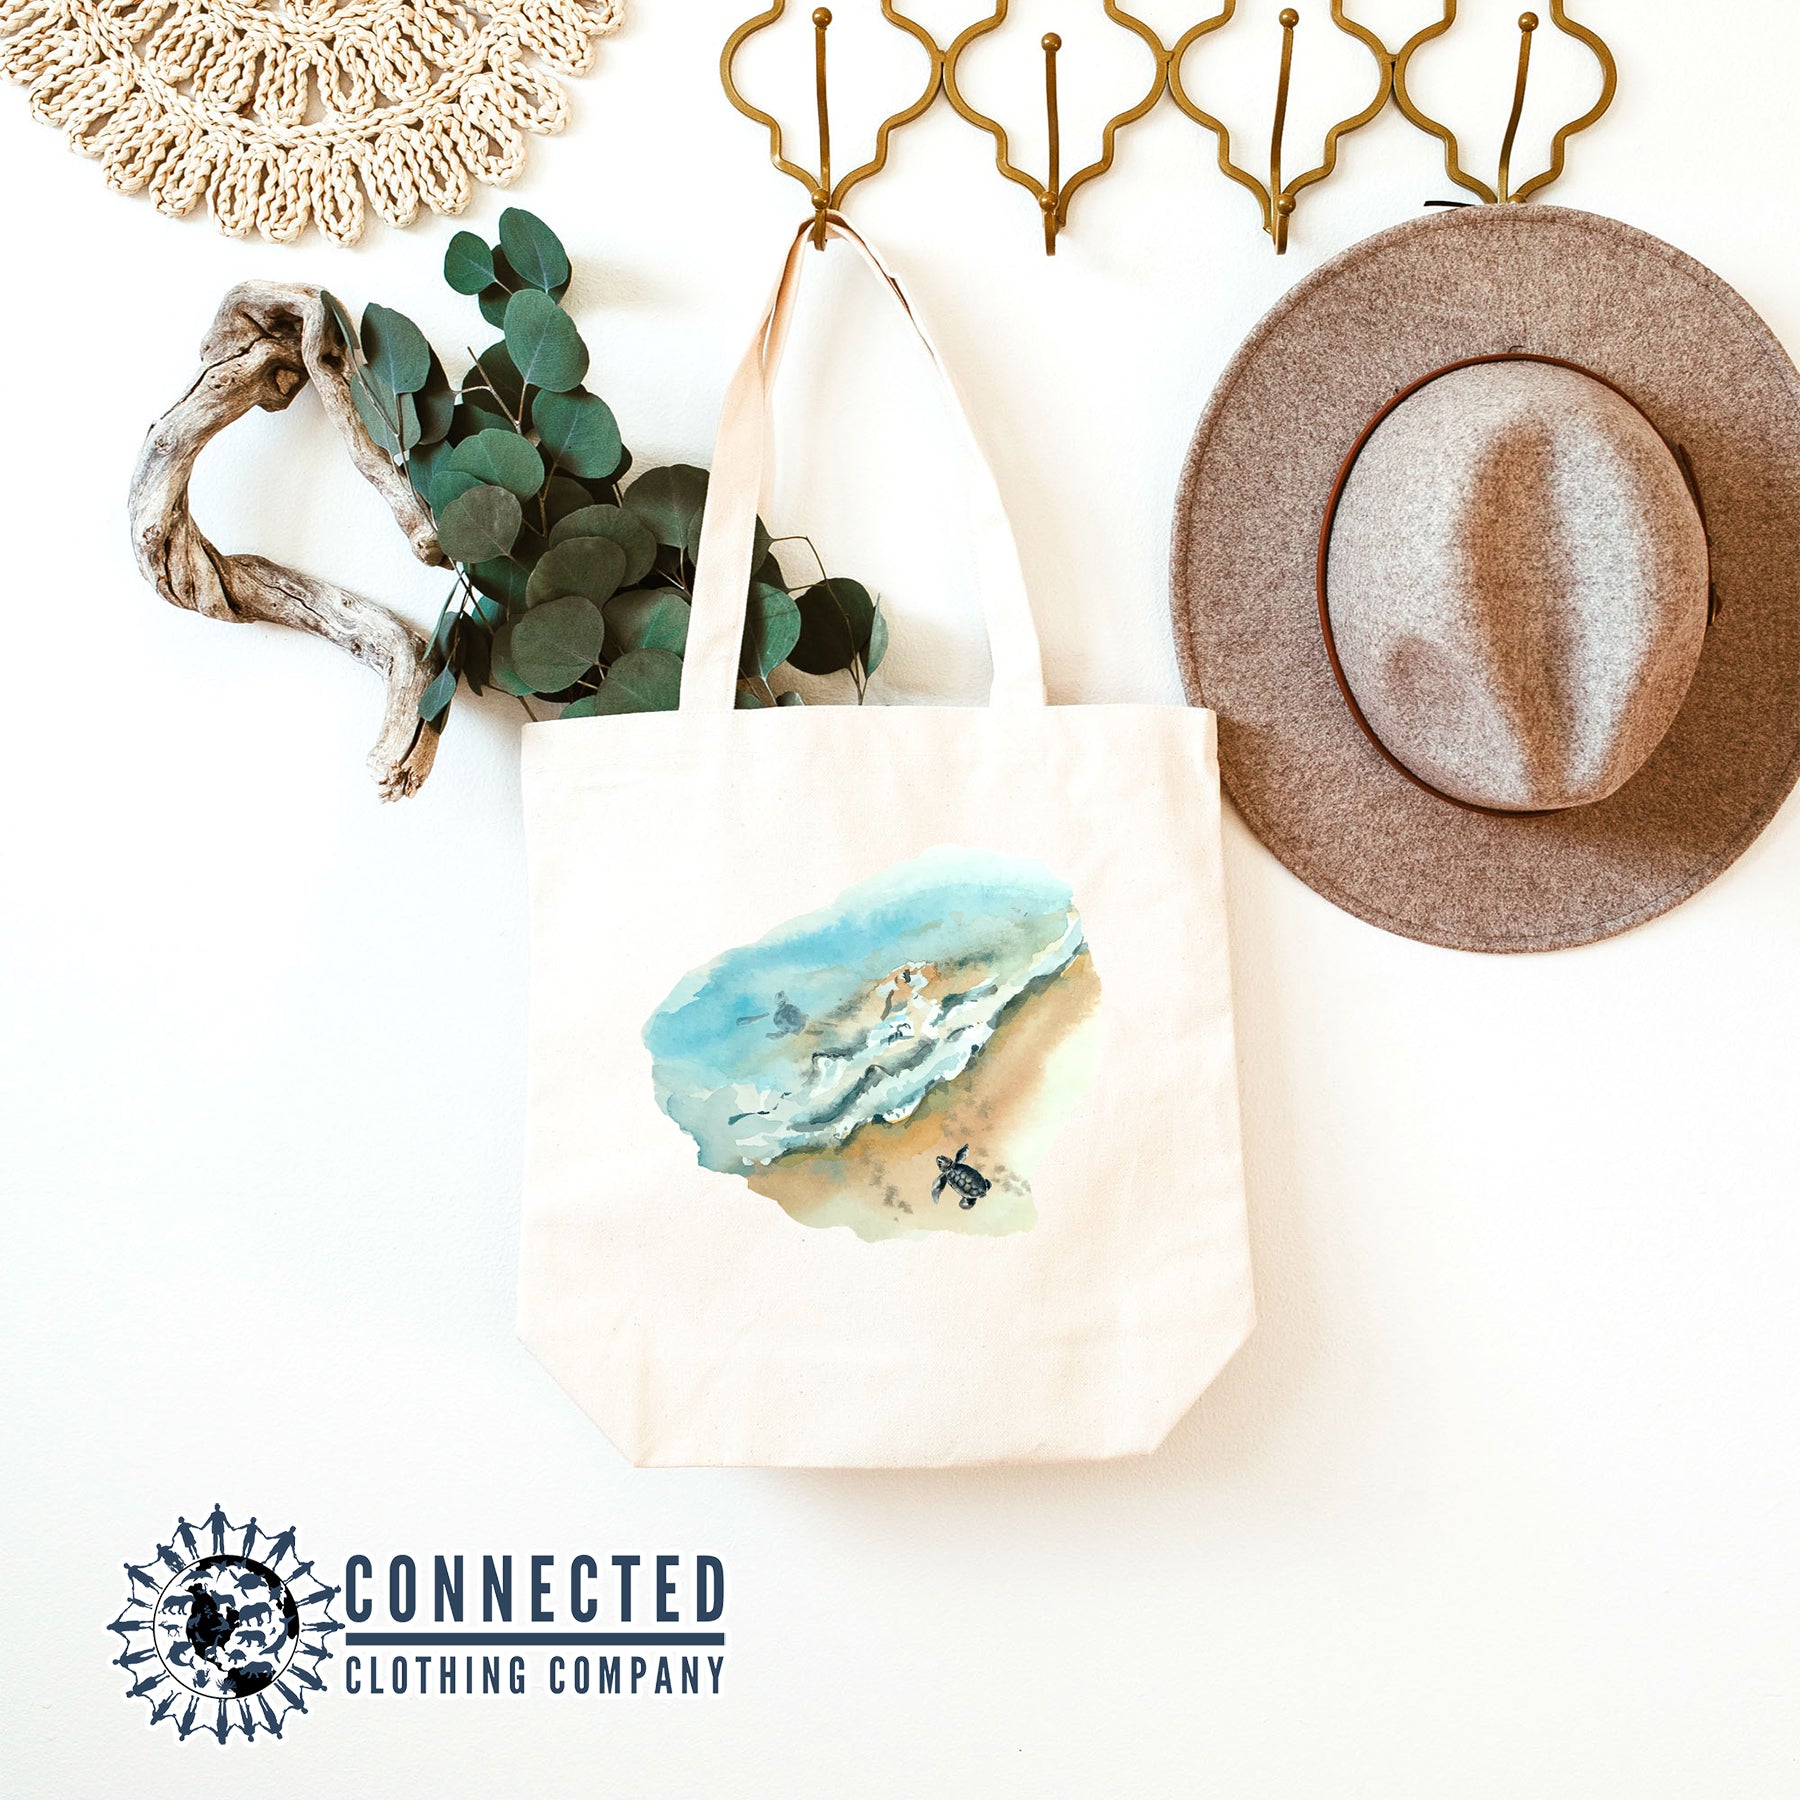 Sea Turtle Hatchling Tote Bag - Connected Clothing Company - 10% of proceeds donated to ocean conservation